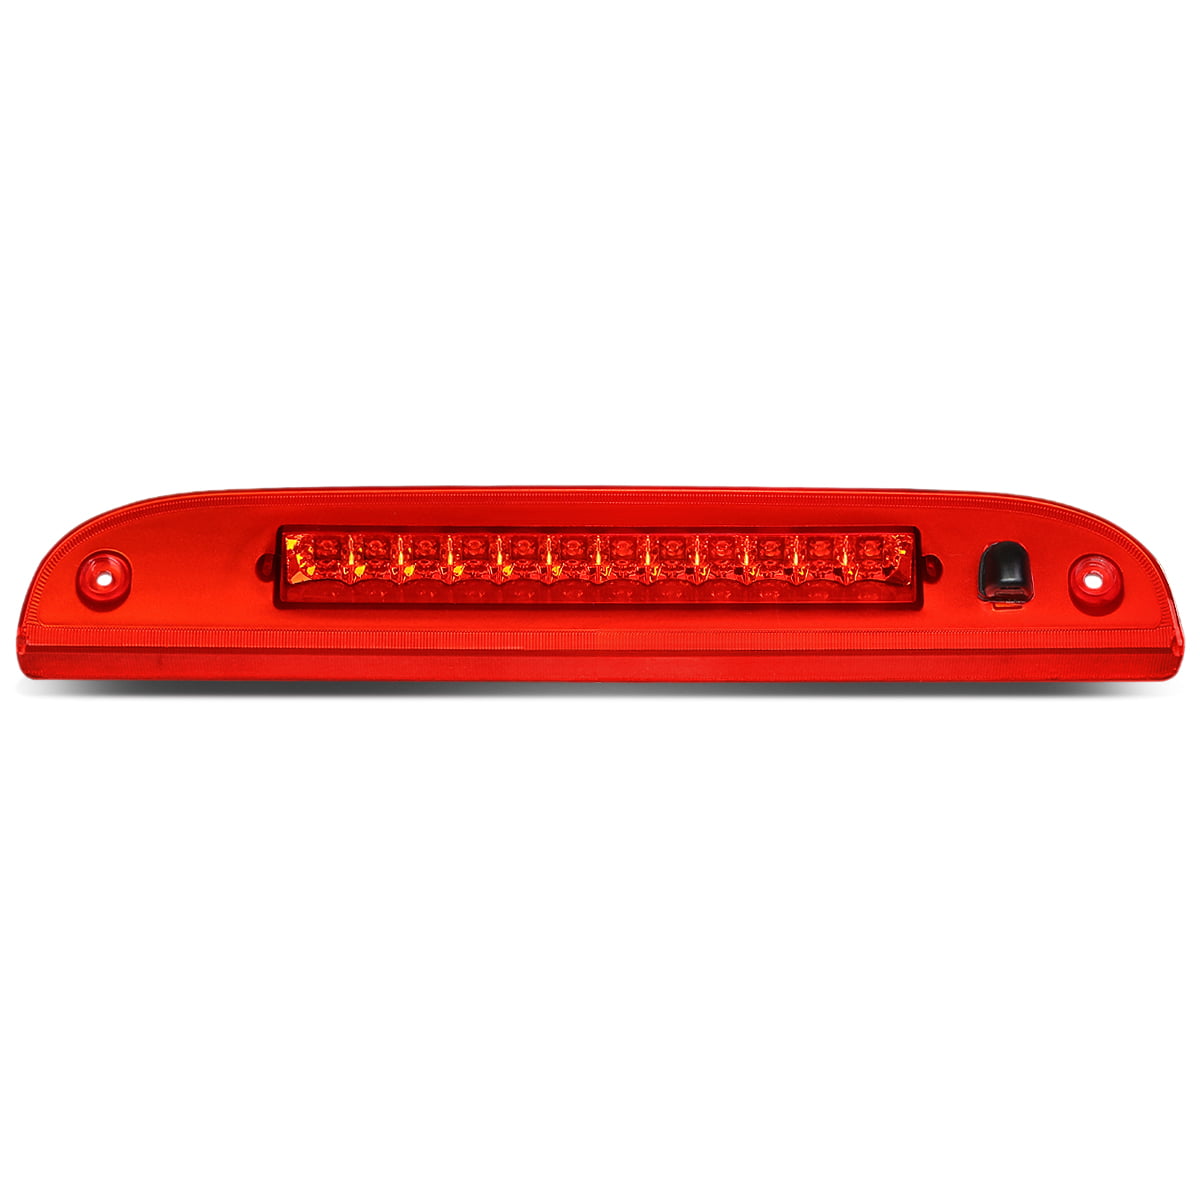 Red High Mount 3rd Stop Light Assemblies,Compatible with 2002-2010 Ford Explorer 08-11 Mercury Mariner Ford Escape,Mercury Mountaineer Third Center Cargo Reverse Rear LED Brake Light Bar Taillight 